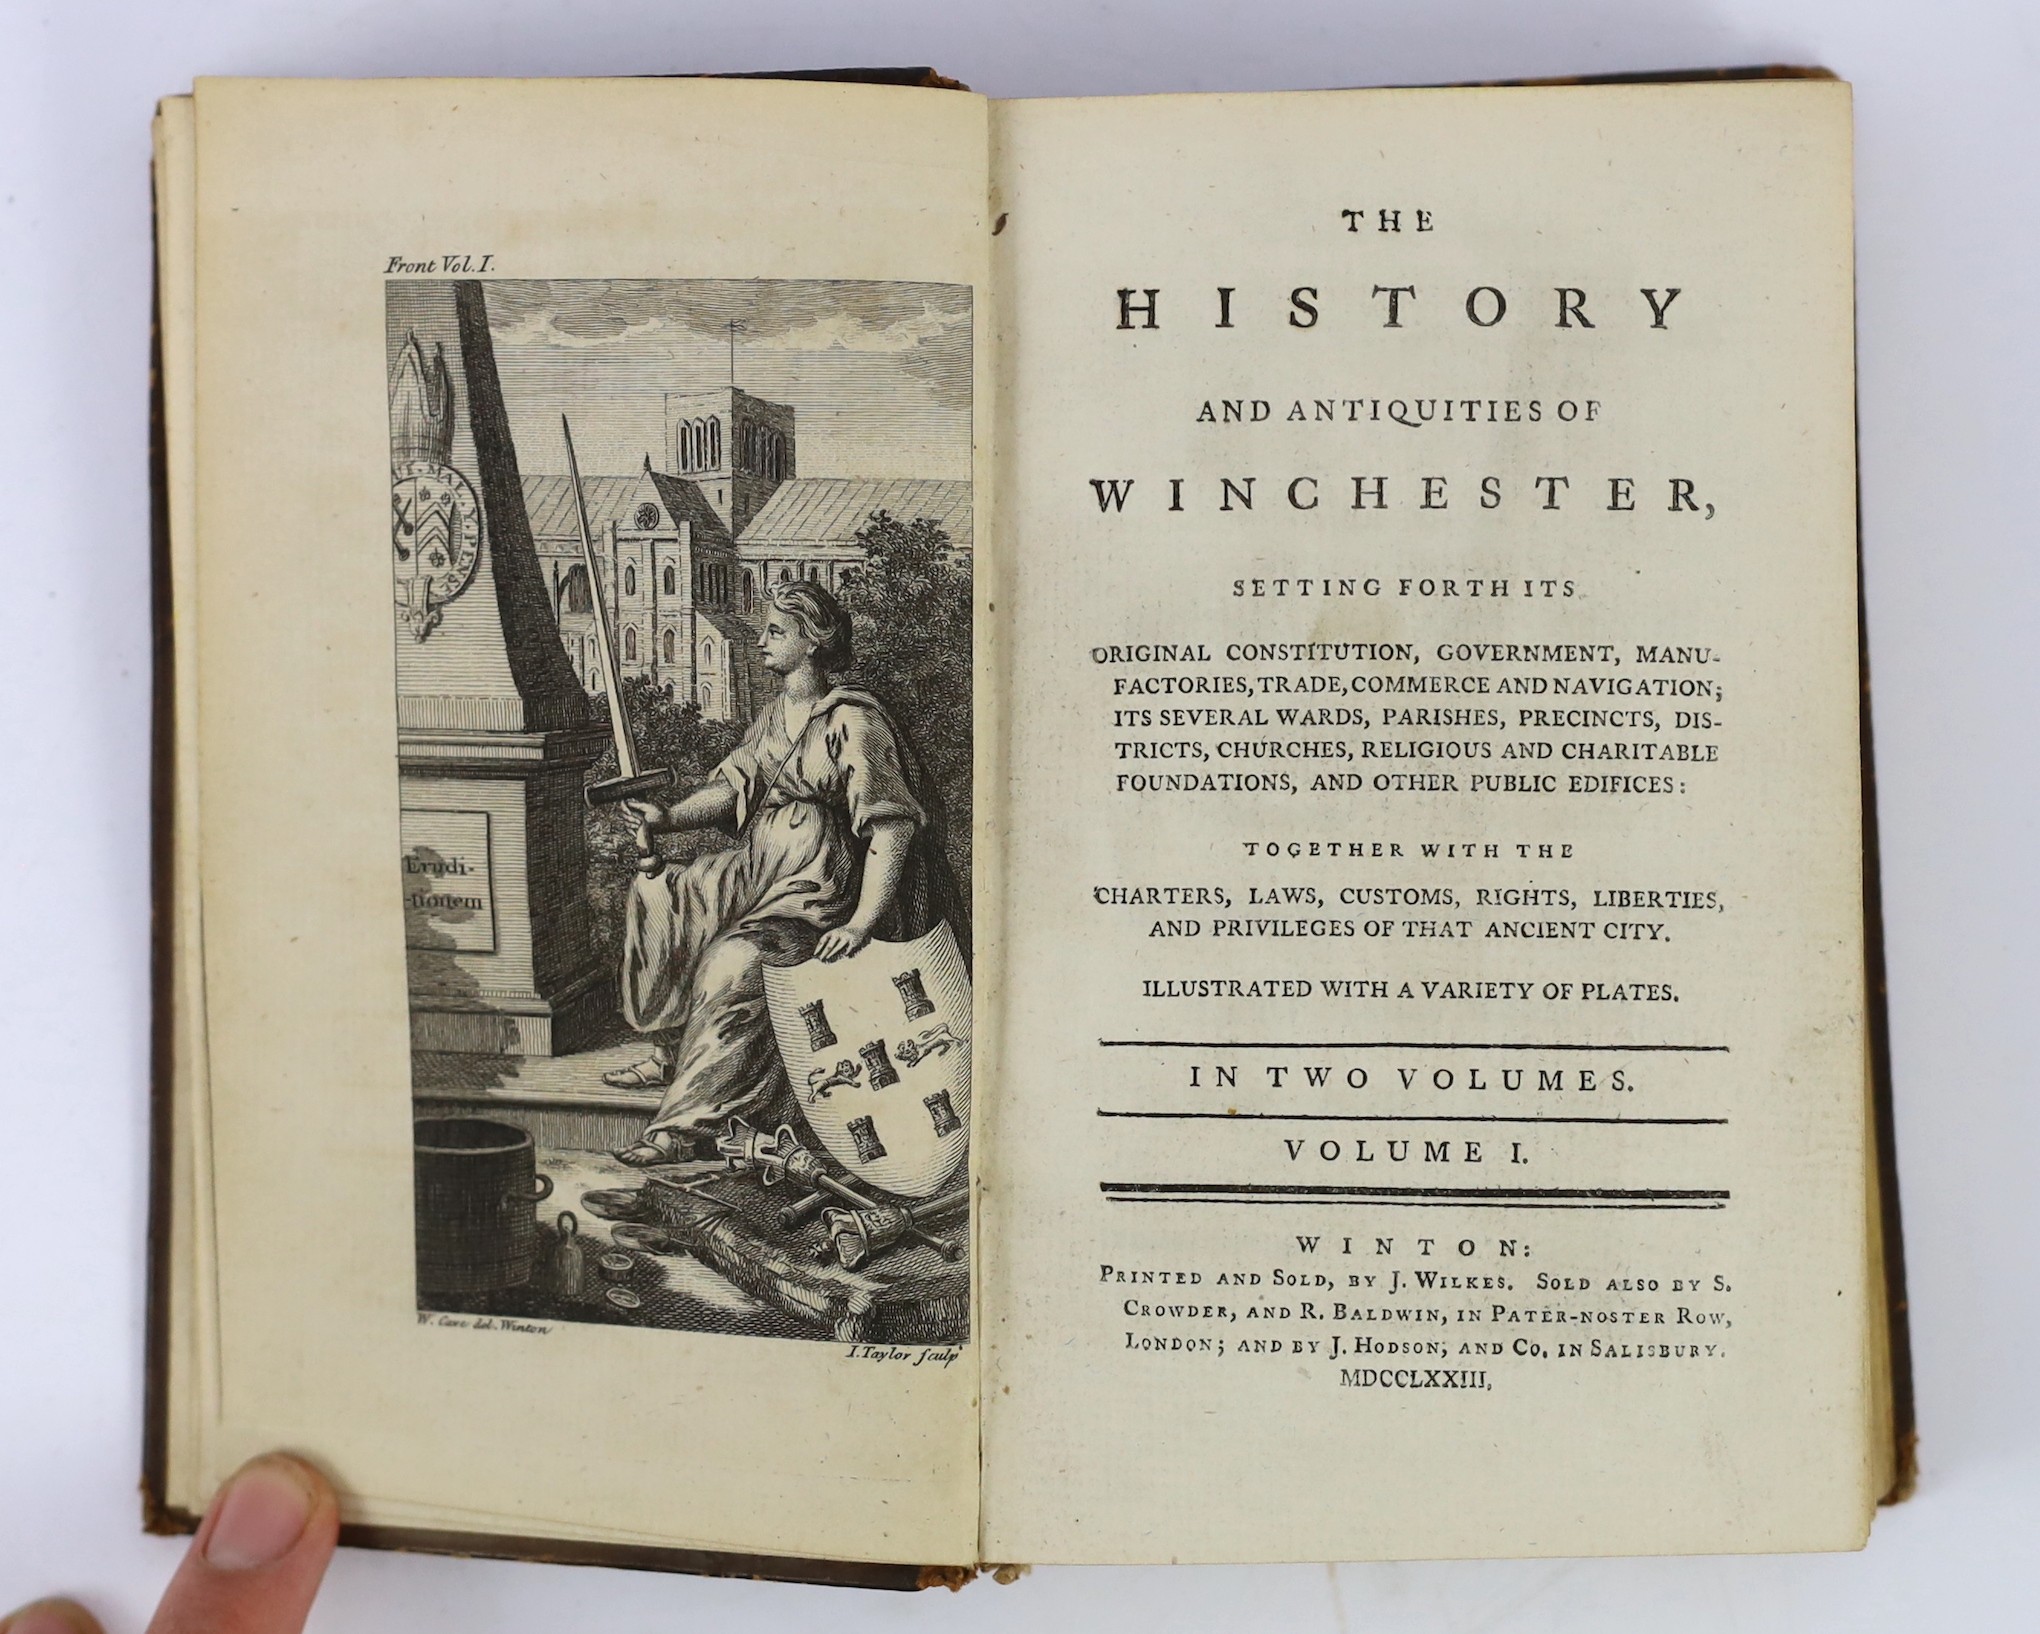 HANTS: Ball, Charles - An Historical Account of Winchester, with Descriptive Walks. pictorial engraved title, frontis. and 10 text engravings (some with miniature plans beneath)